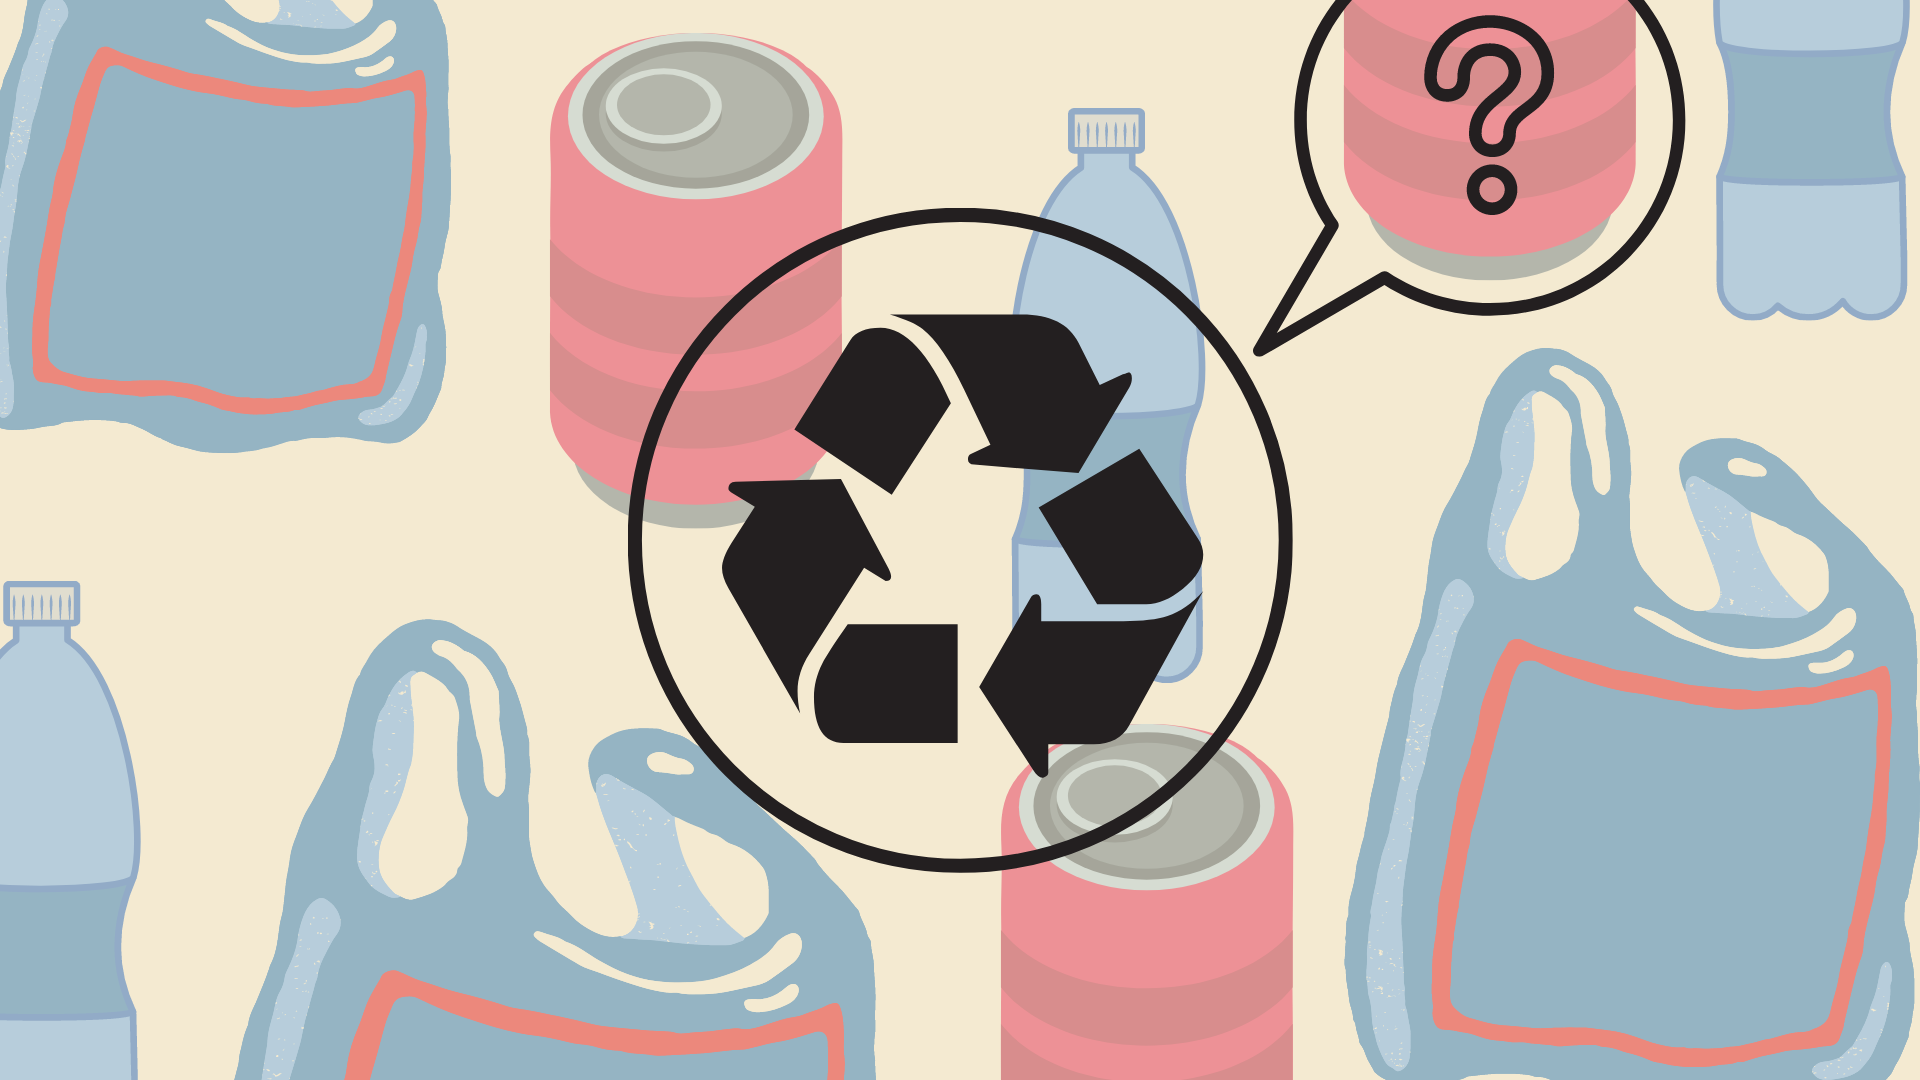 Pastel coloured graphic. Background of plastic bags and drinks cans foregrounded by recycling symbol.